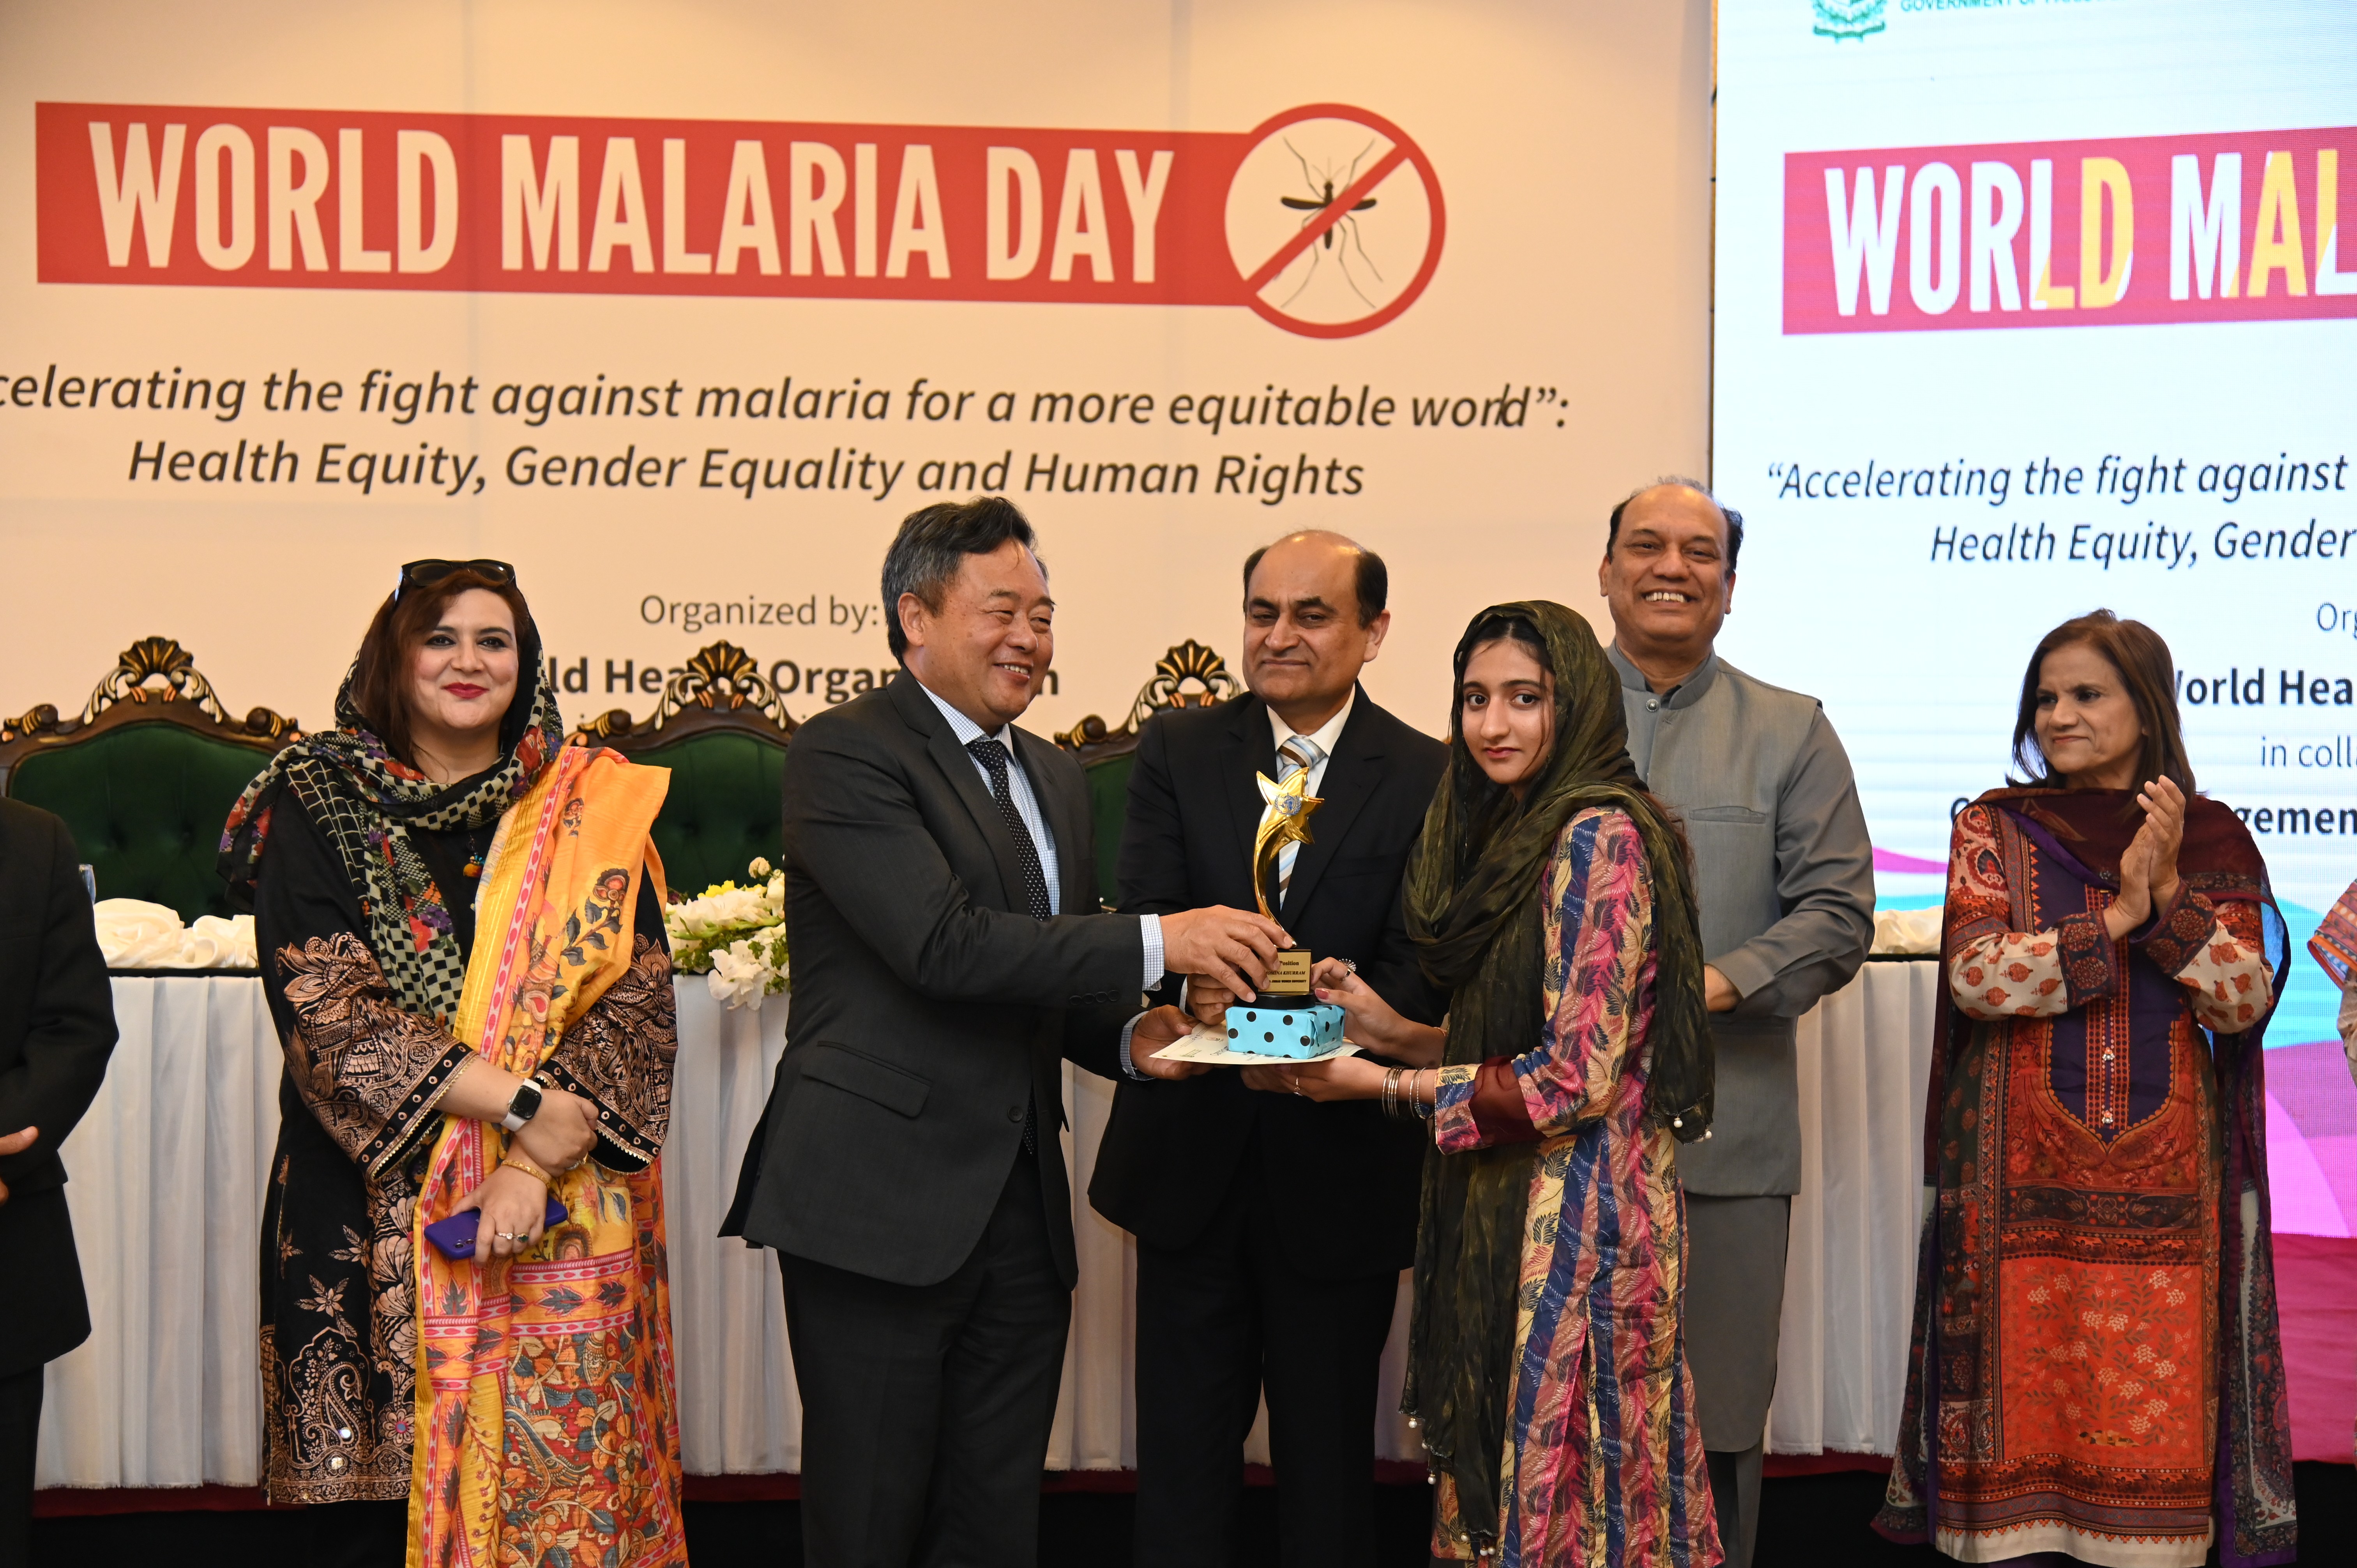 The shield distribution at the event of World Malaria Day 2028